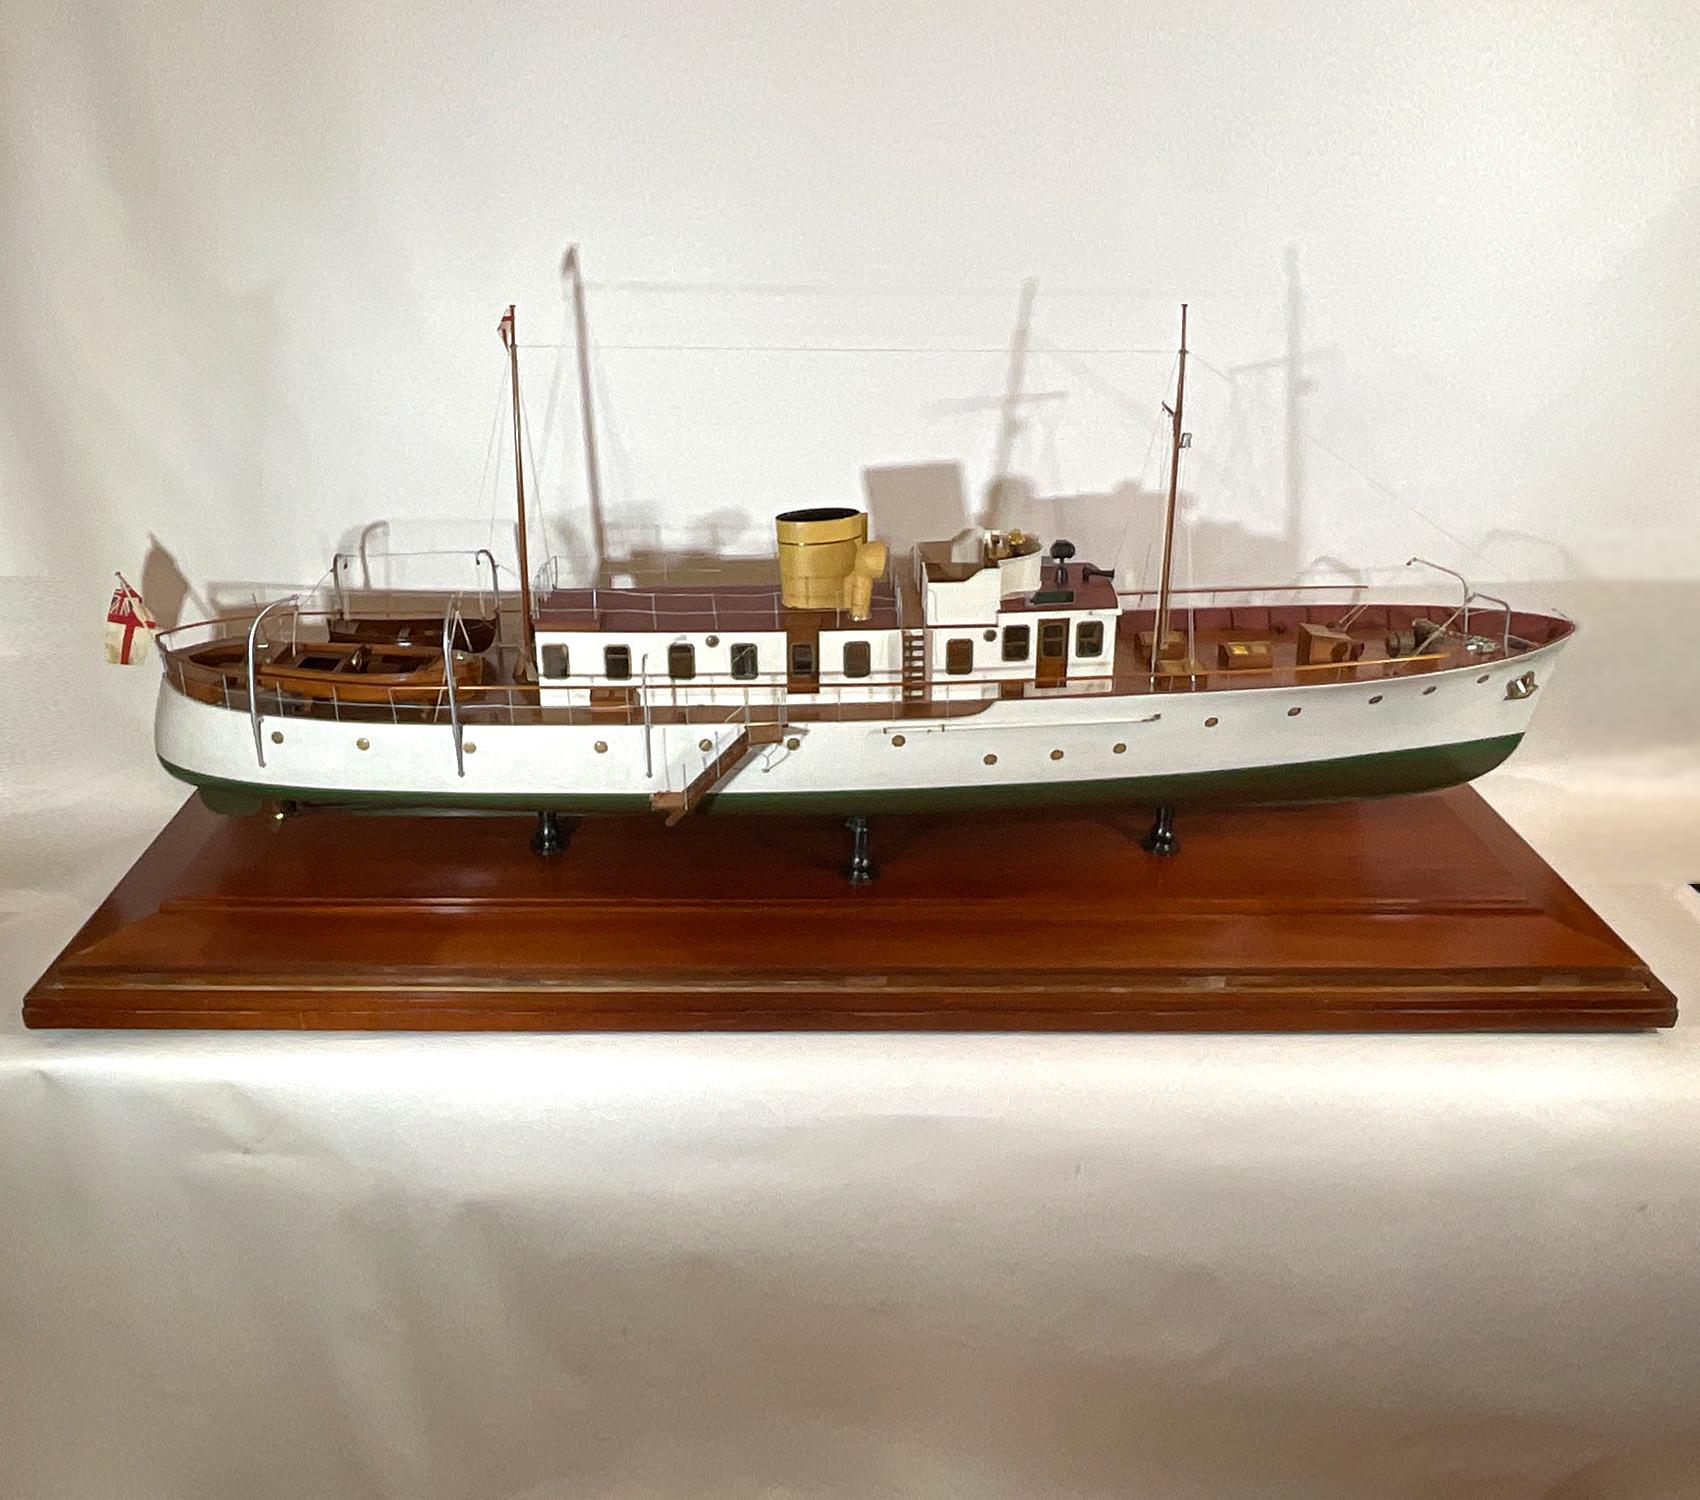 Extraordinary original dockyard builders model of the royal yacht squadron vessel RYS CETO, a 130 ton diesel yacht owned by the Earl Fitzwilliam. Built in 1935 by Vosper. RYS CETO served in the royal navy during World War II. This model is